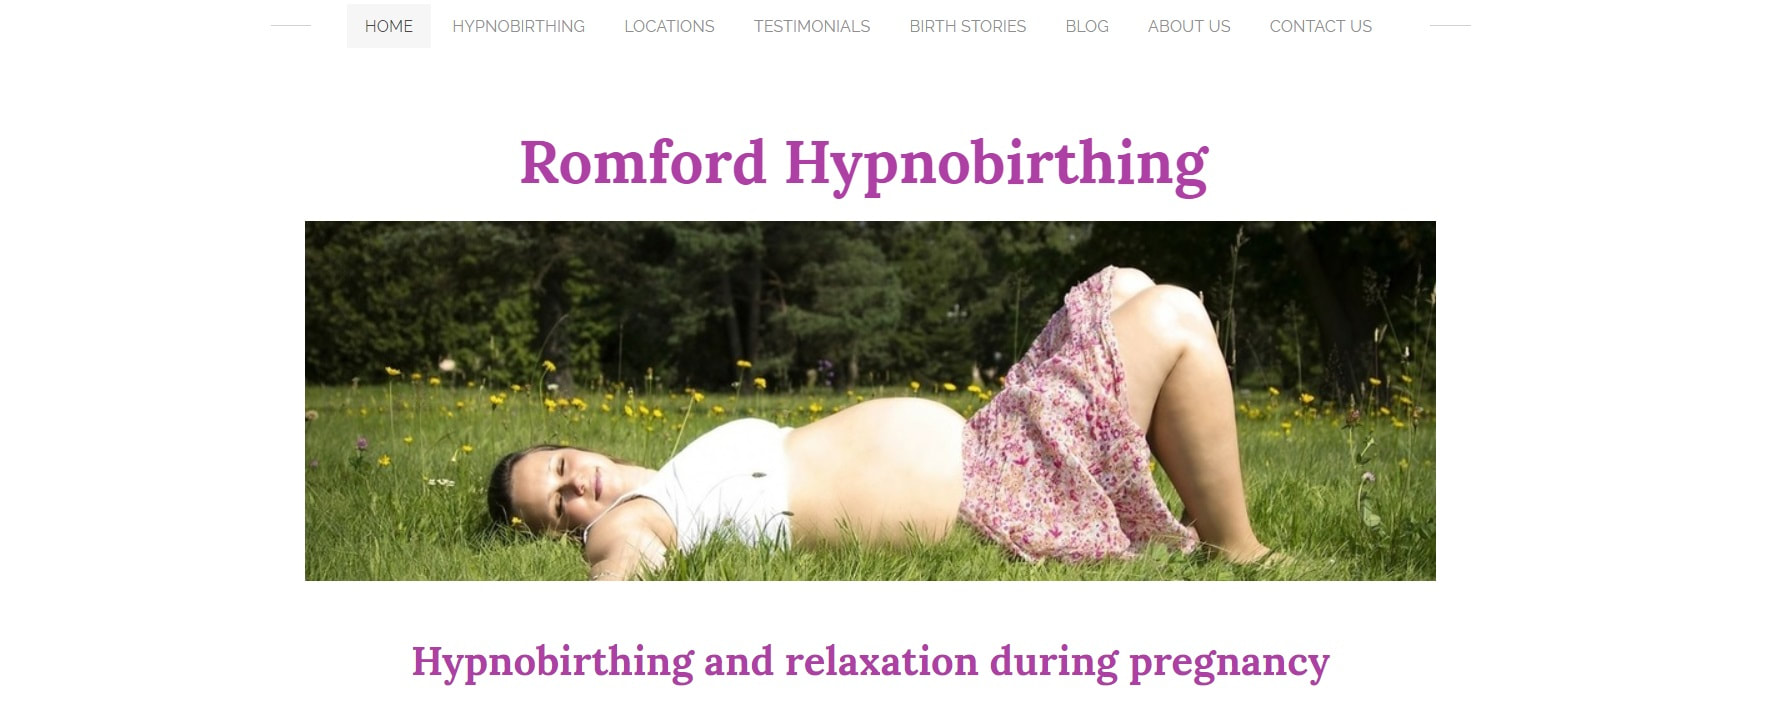 Screen shot of website called Romford Hynobirthing of pregnant lady lying on her back on grass with her swollen tummy exposed.